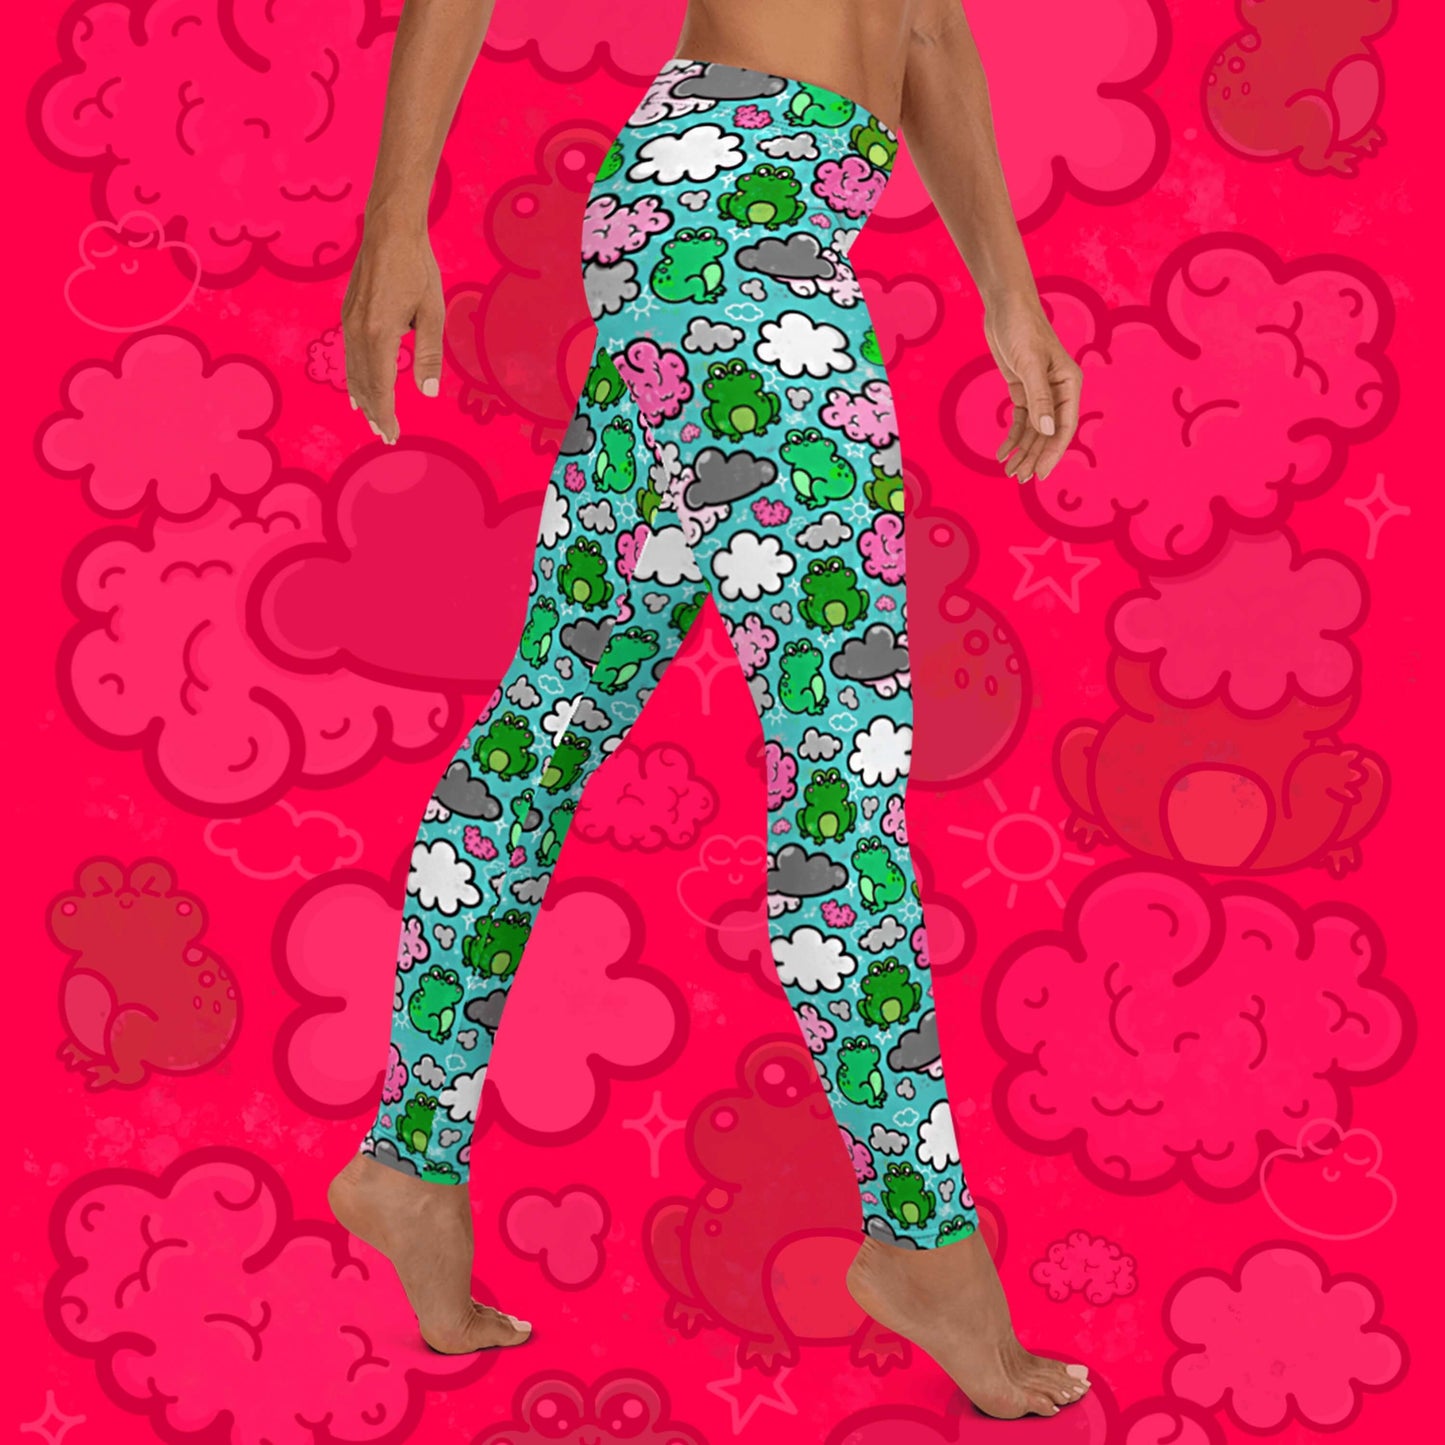 The Brain Frog Leggings - Brain Fog being worn by a model walking right on a red background with a faded brain frog print, the photo is cropped from the hips down. The leggings are an aqua blue base with various green kawaii face frogs with pink blush cheeks, pink brain style clouds, white and grey clouds and white sparkles all over. The design was created to raise awareness of Brain Fog.